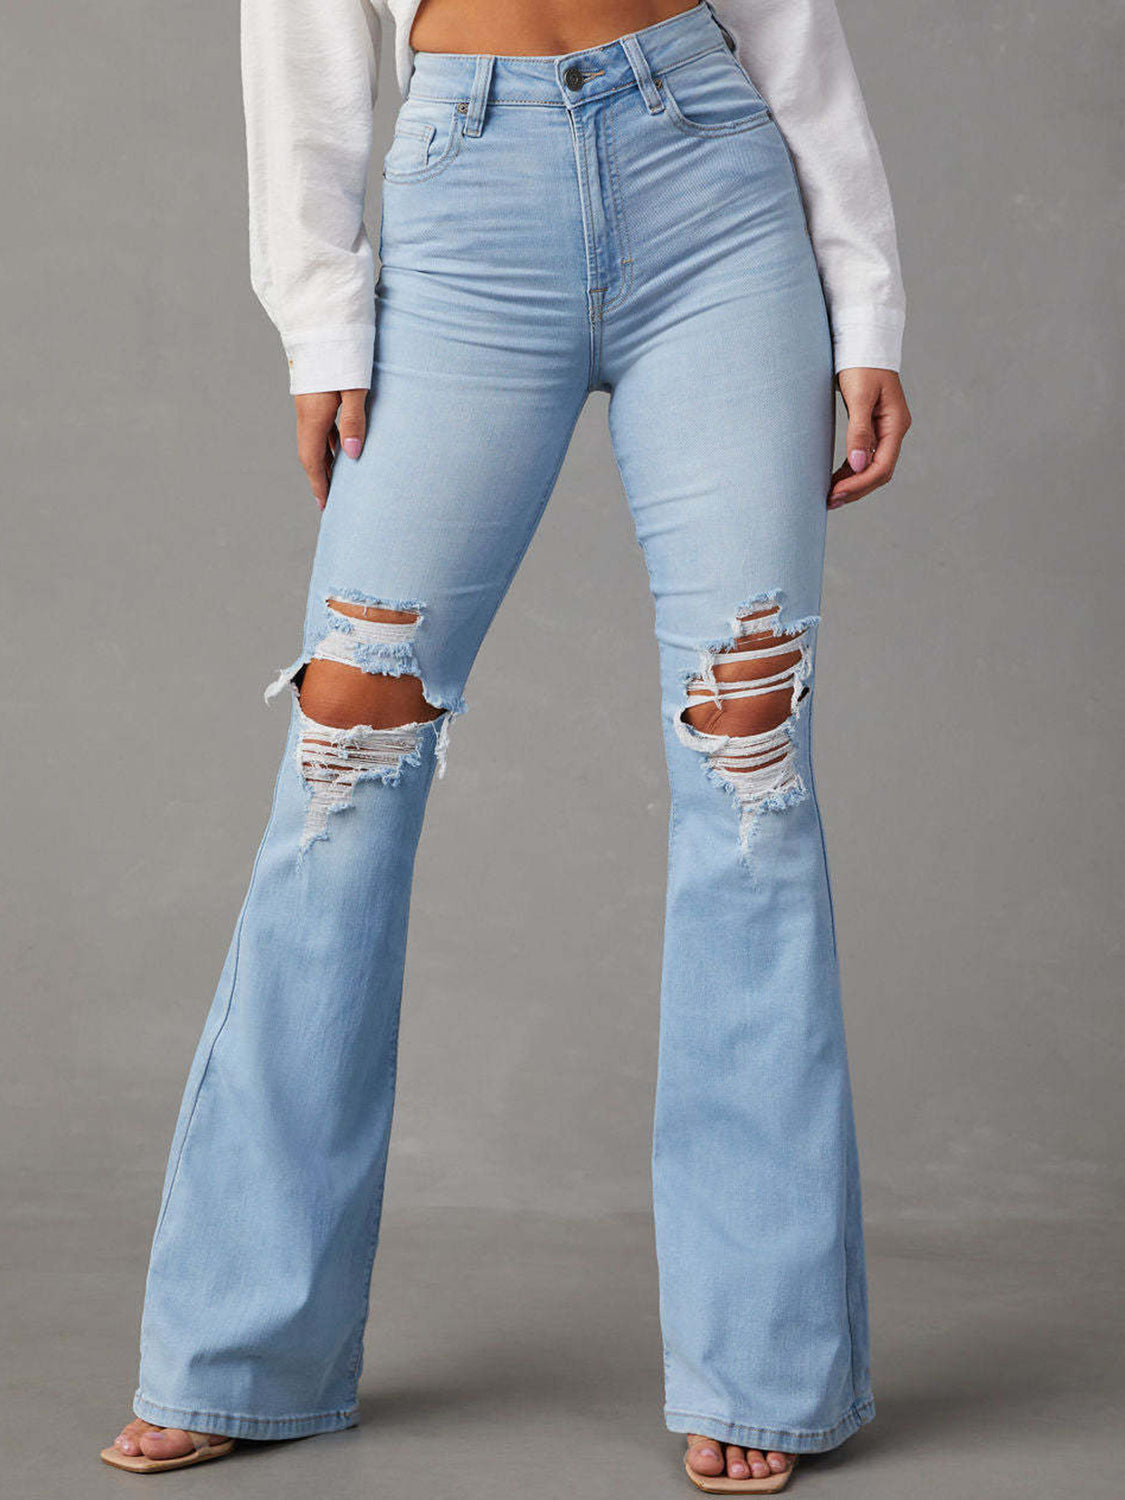 Distressed Bootcut Jeans with Pockets - GemThreads Boutique Distressed Bootcut Jeans with Pockets